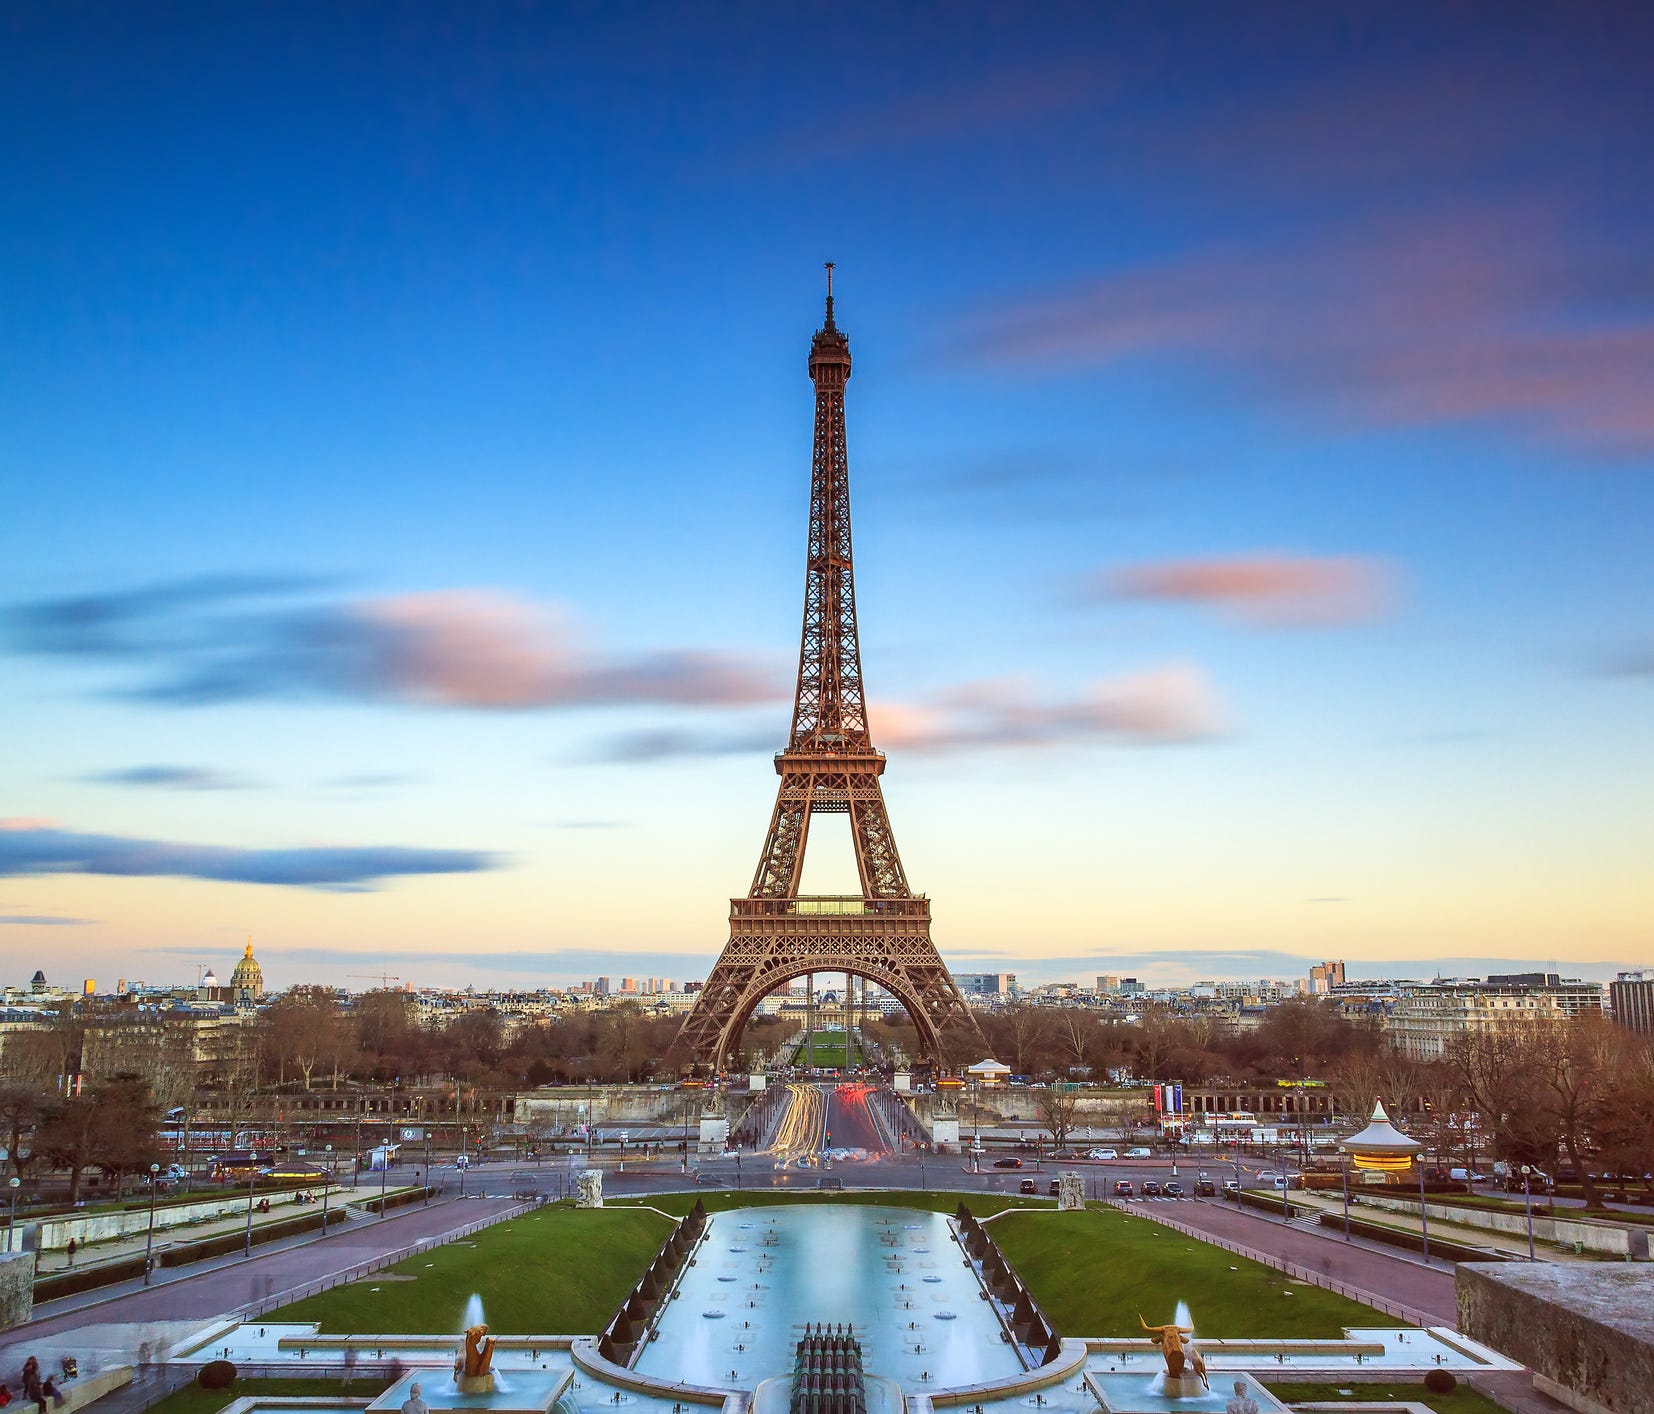 There are some terrific deals to Paris in winter, spring and even early summer.